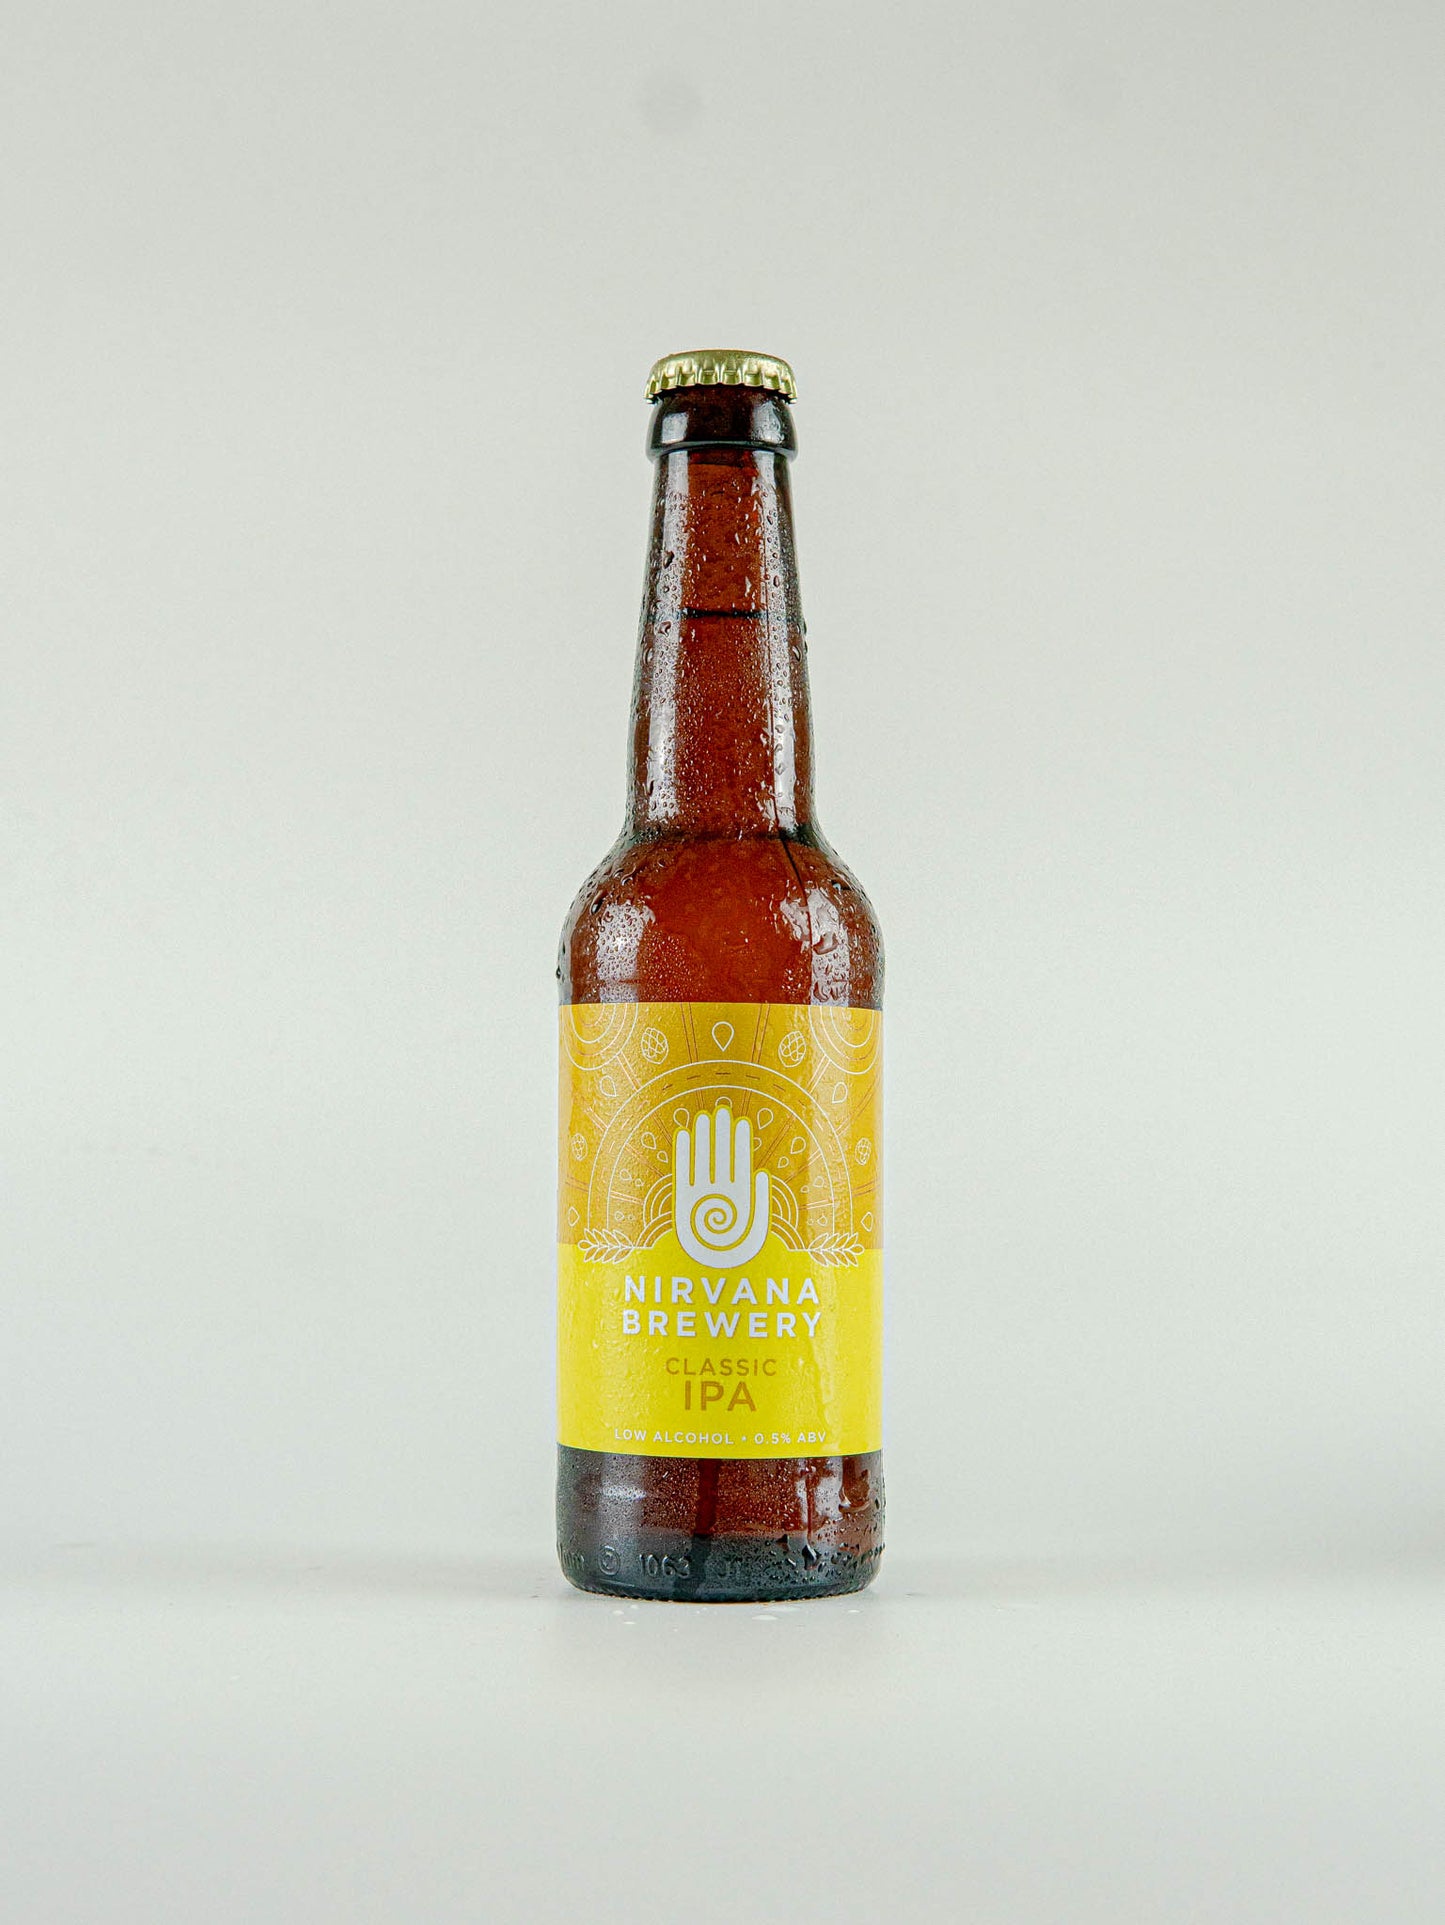 Nirvana Brewery Classic IPA Alcohol Free Sutra 0.5% | Non Alcoholic - LightDrinks